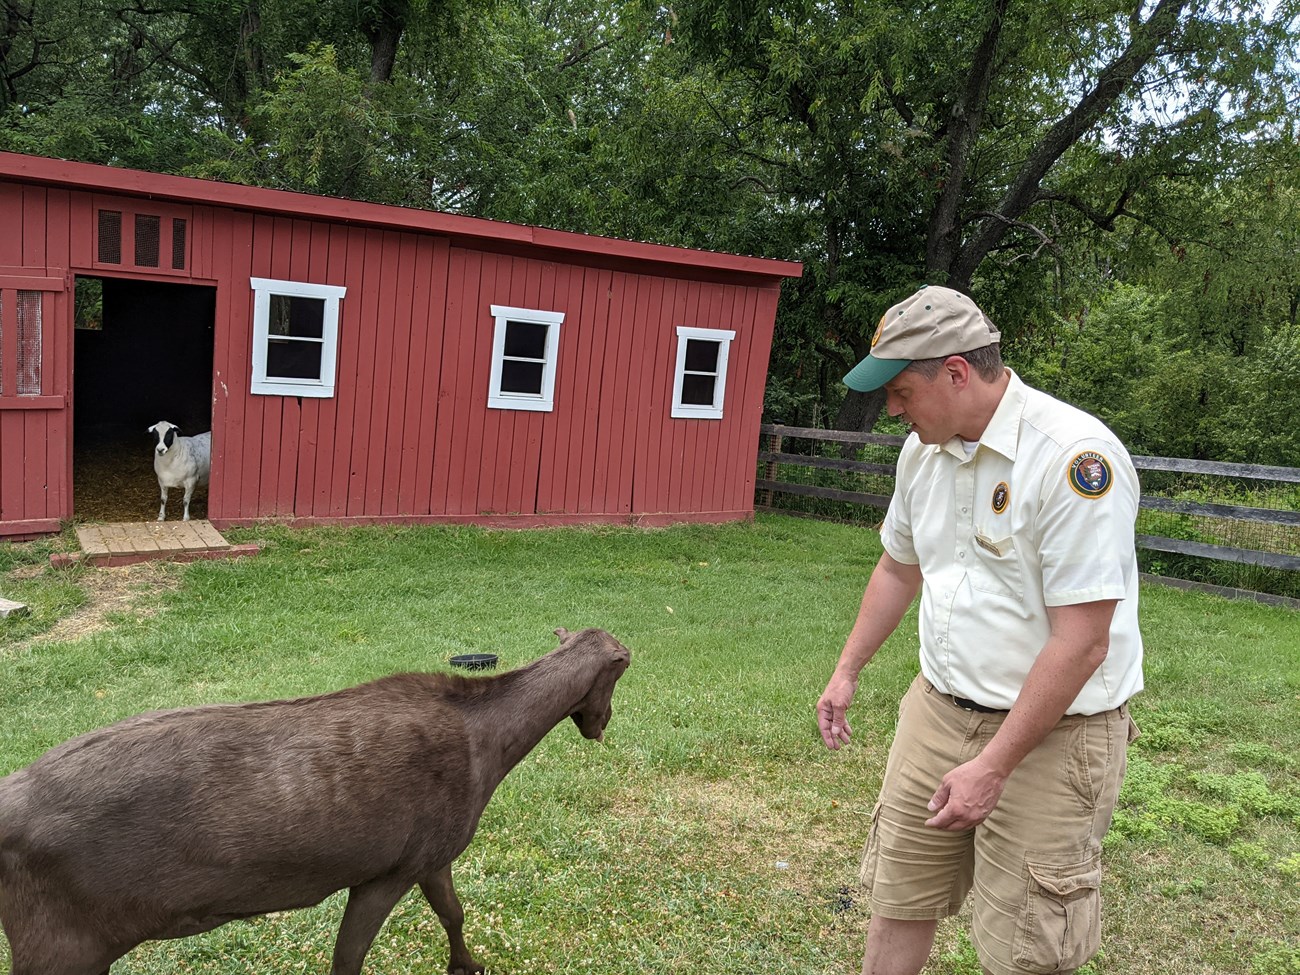 A park volunteer and a brown goat